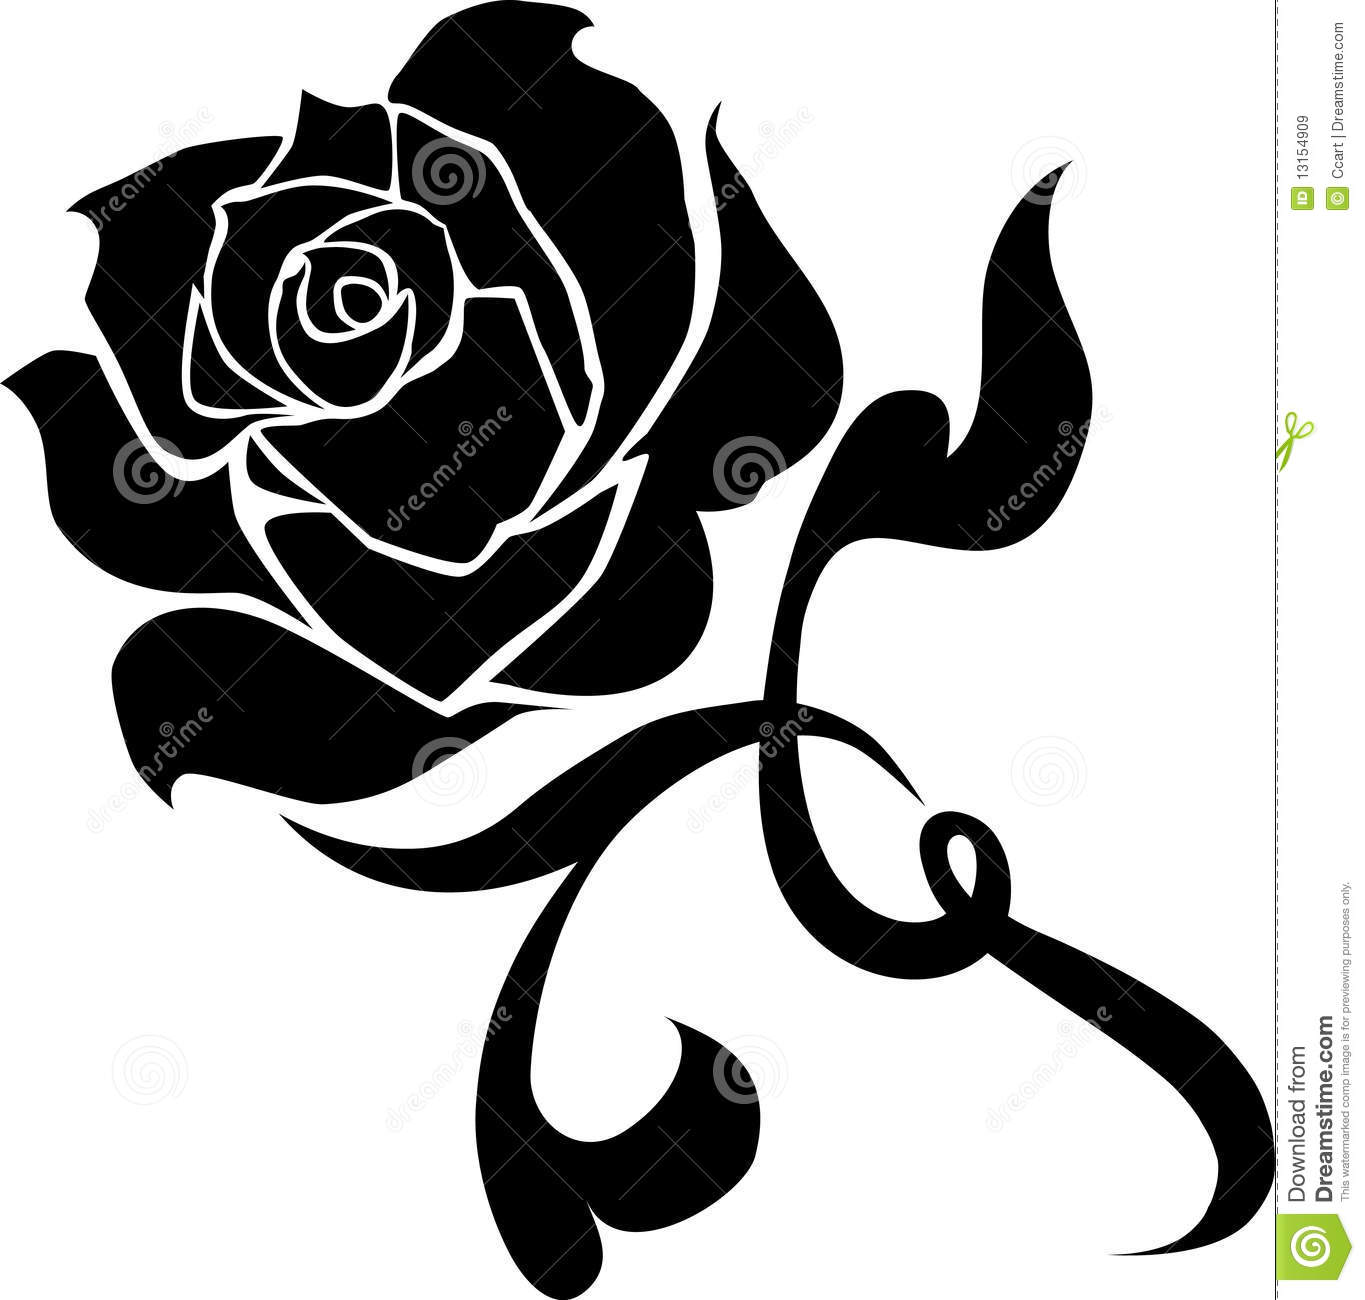 rose clipart vector - photo #35